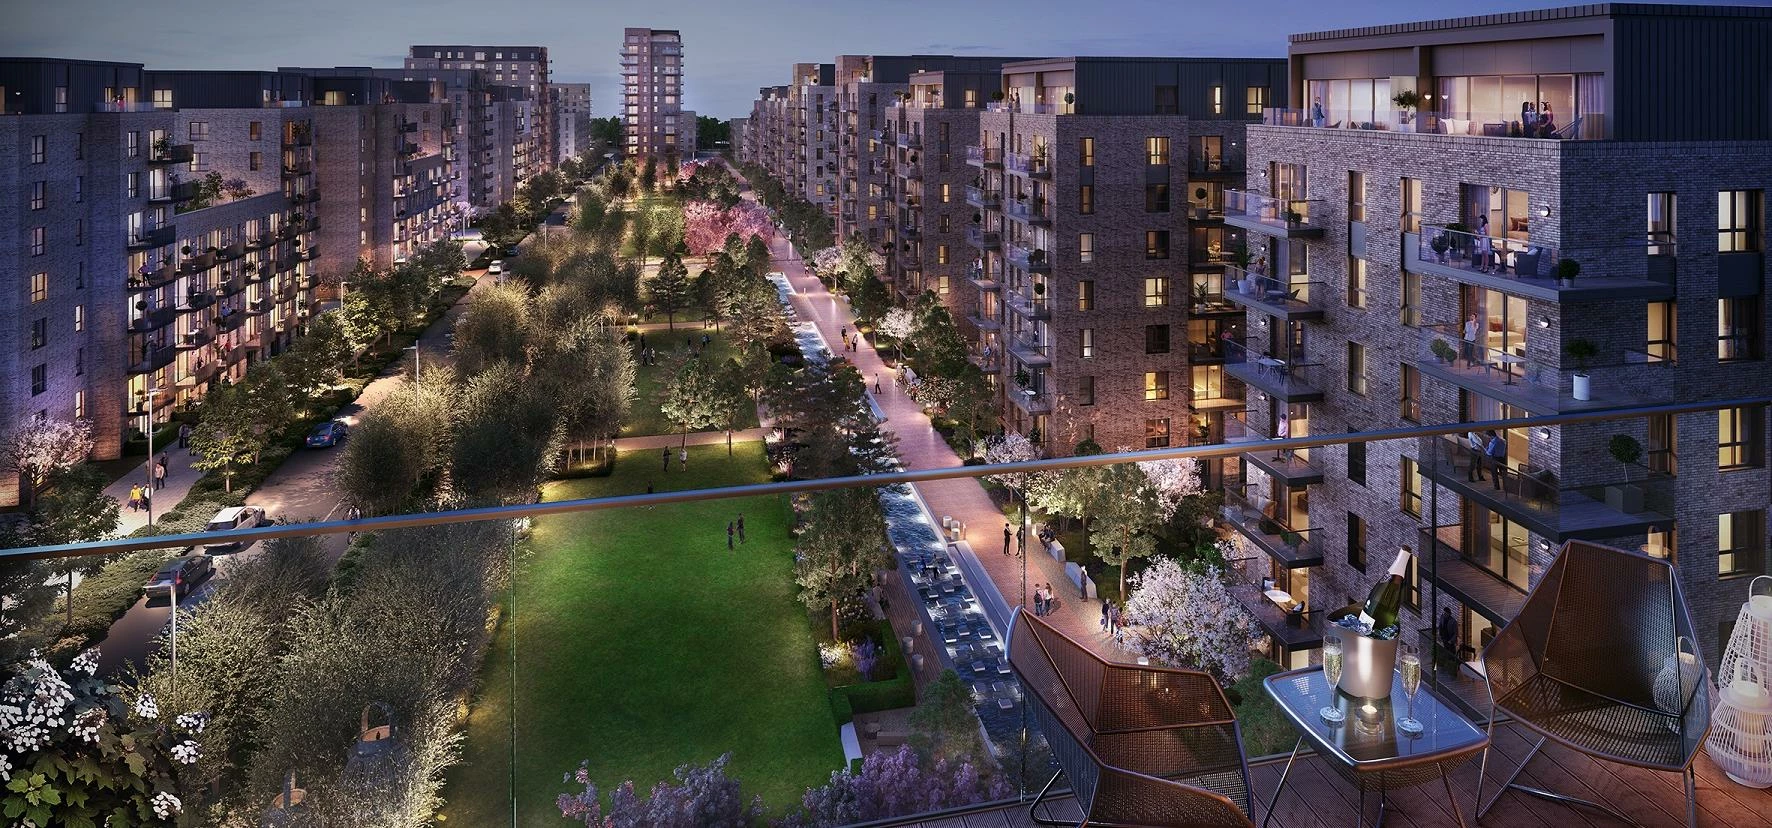 Artist's impression of the completed Southall Waterside development.